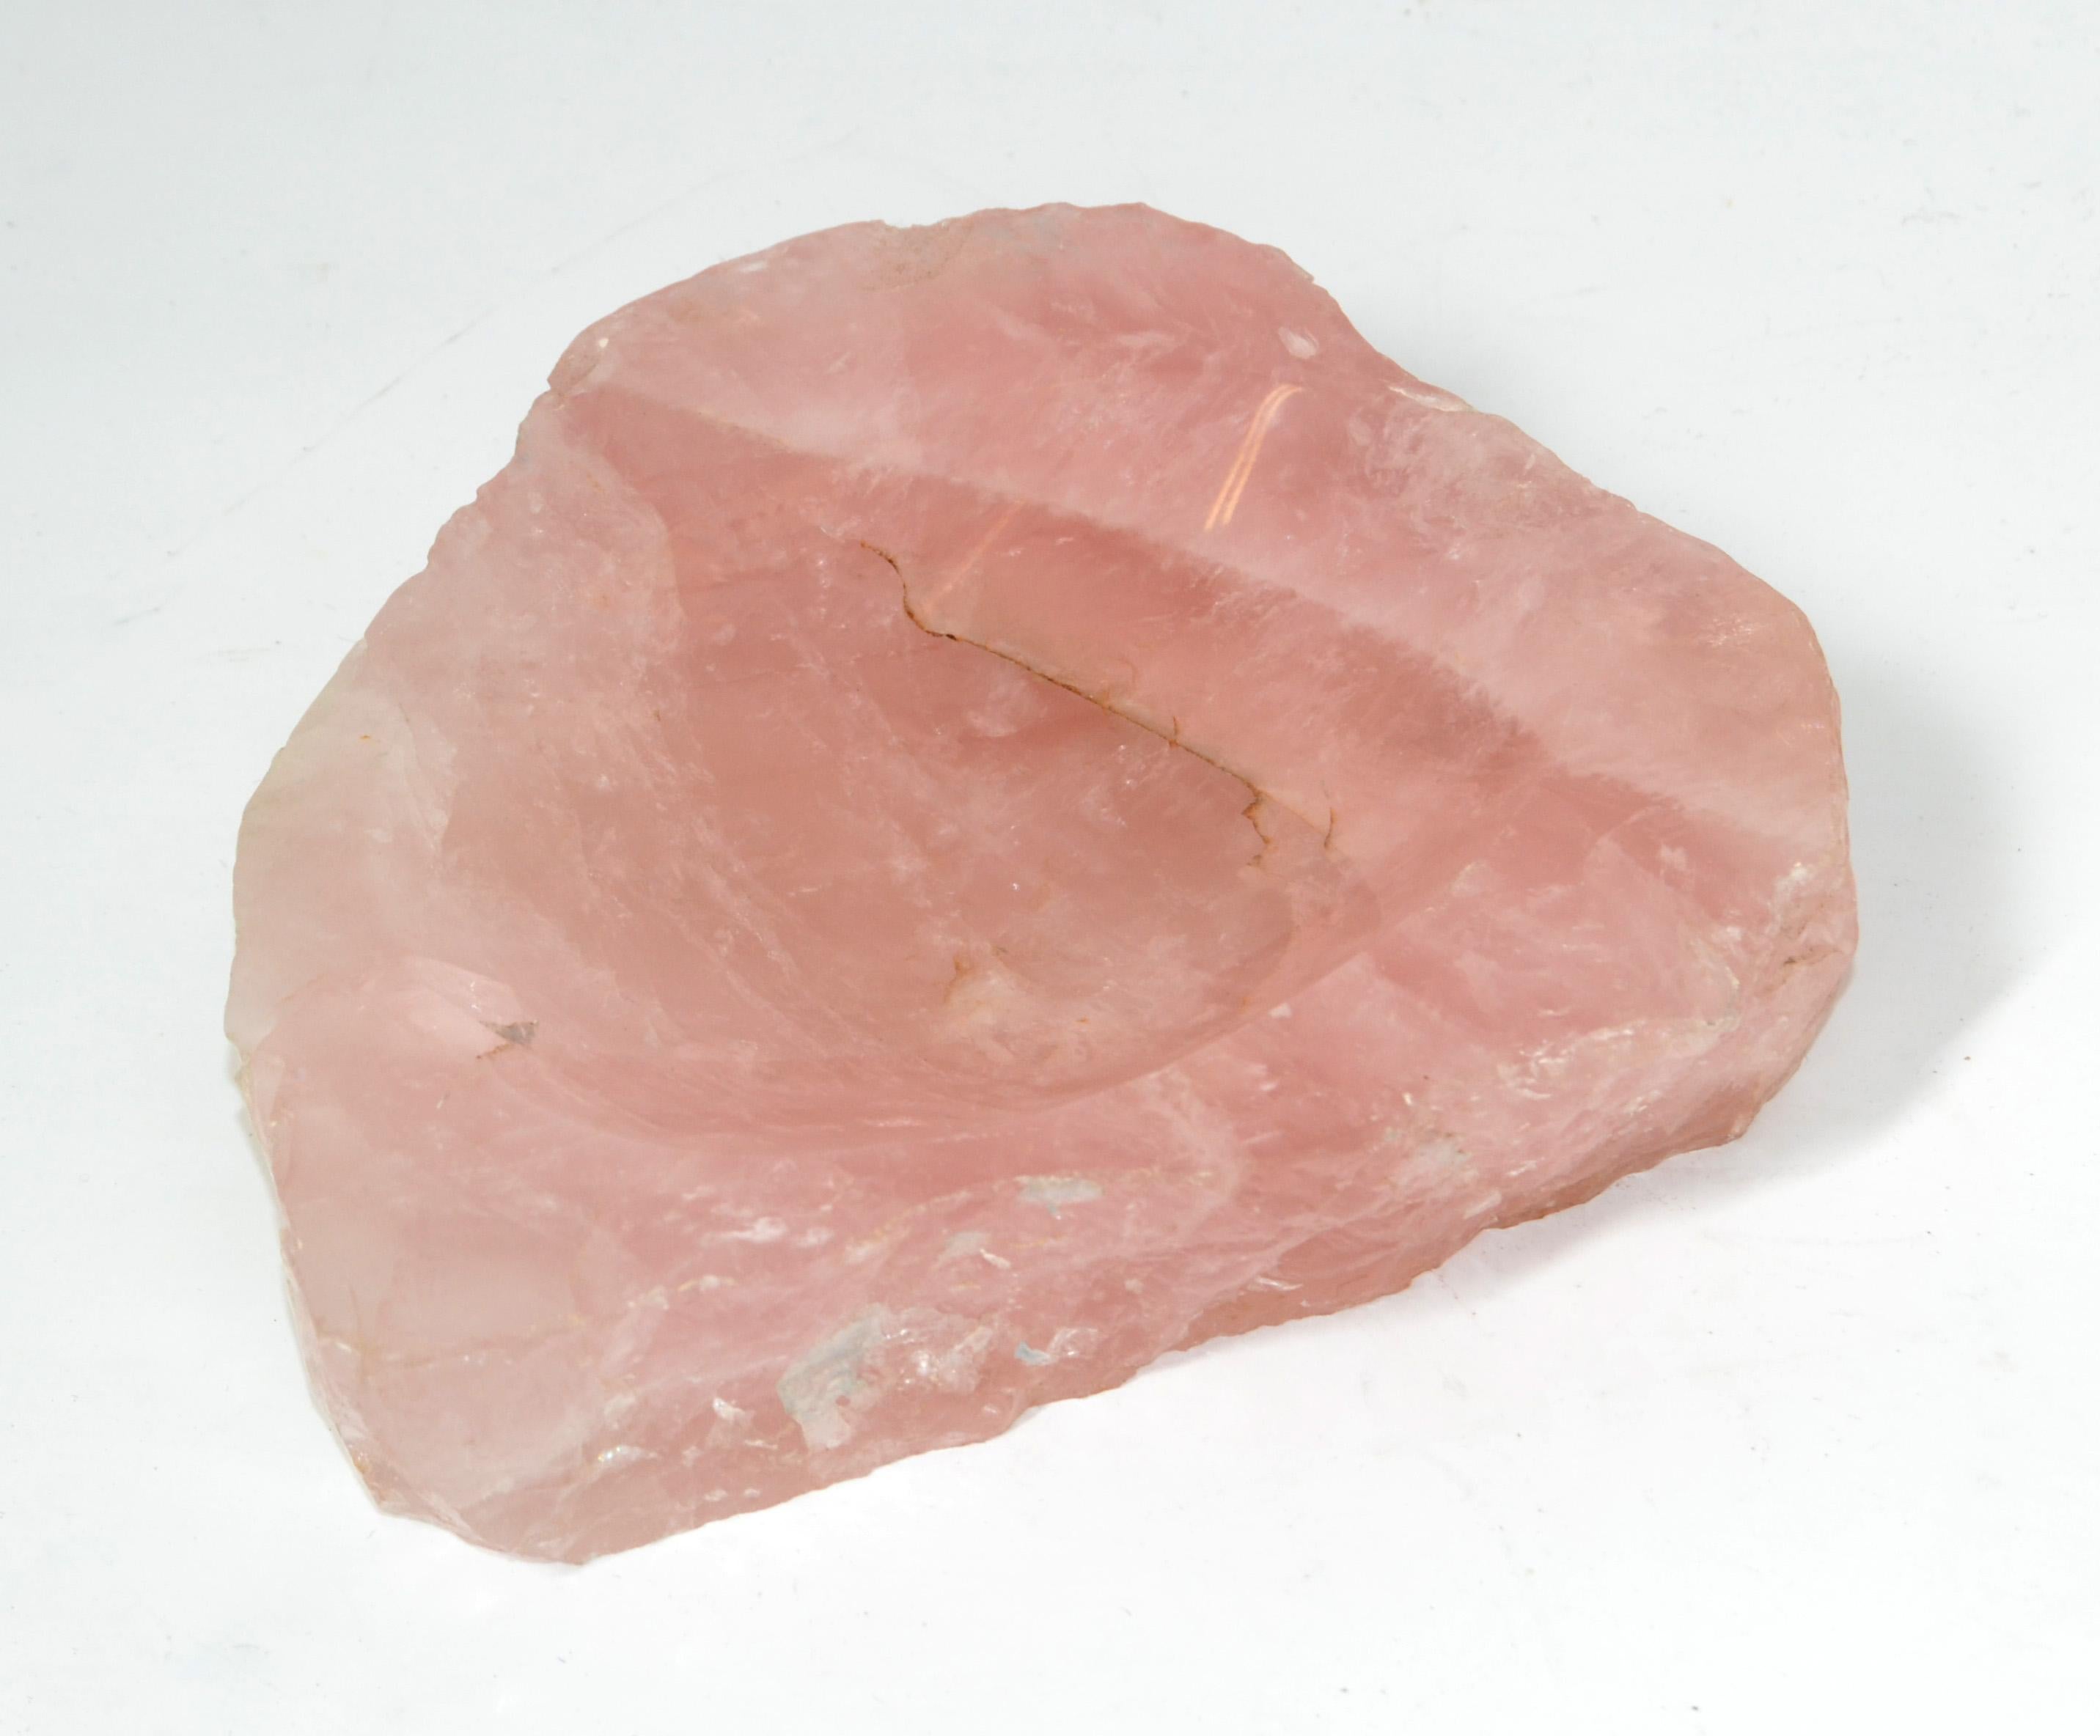 Mid-Century Modern pink and white Mineral Rock ashtray, catchall, vide poche or bowl made in Italy.
Raw Rock Crystal hand carved in a geometric shape.
Great as Ring Dish or Key Bowl on Top of Your Dresser.